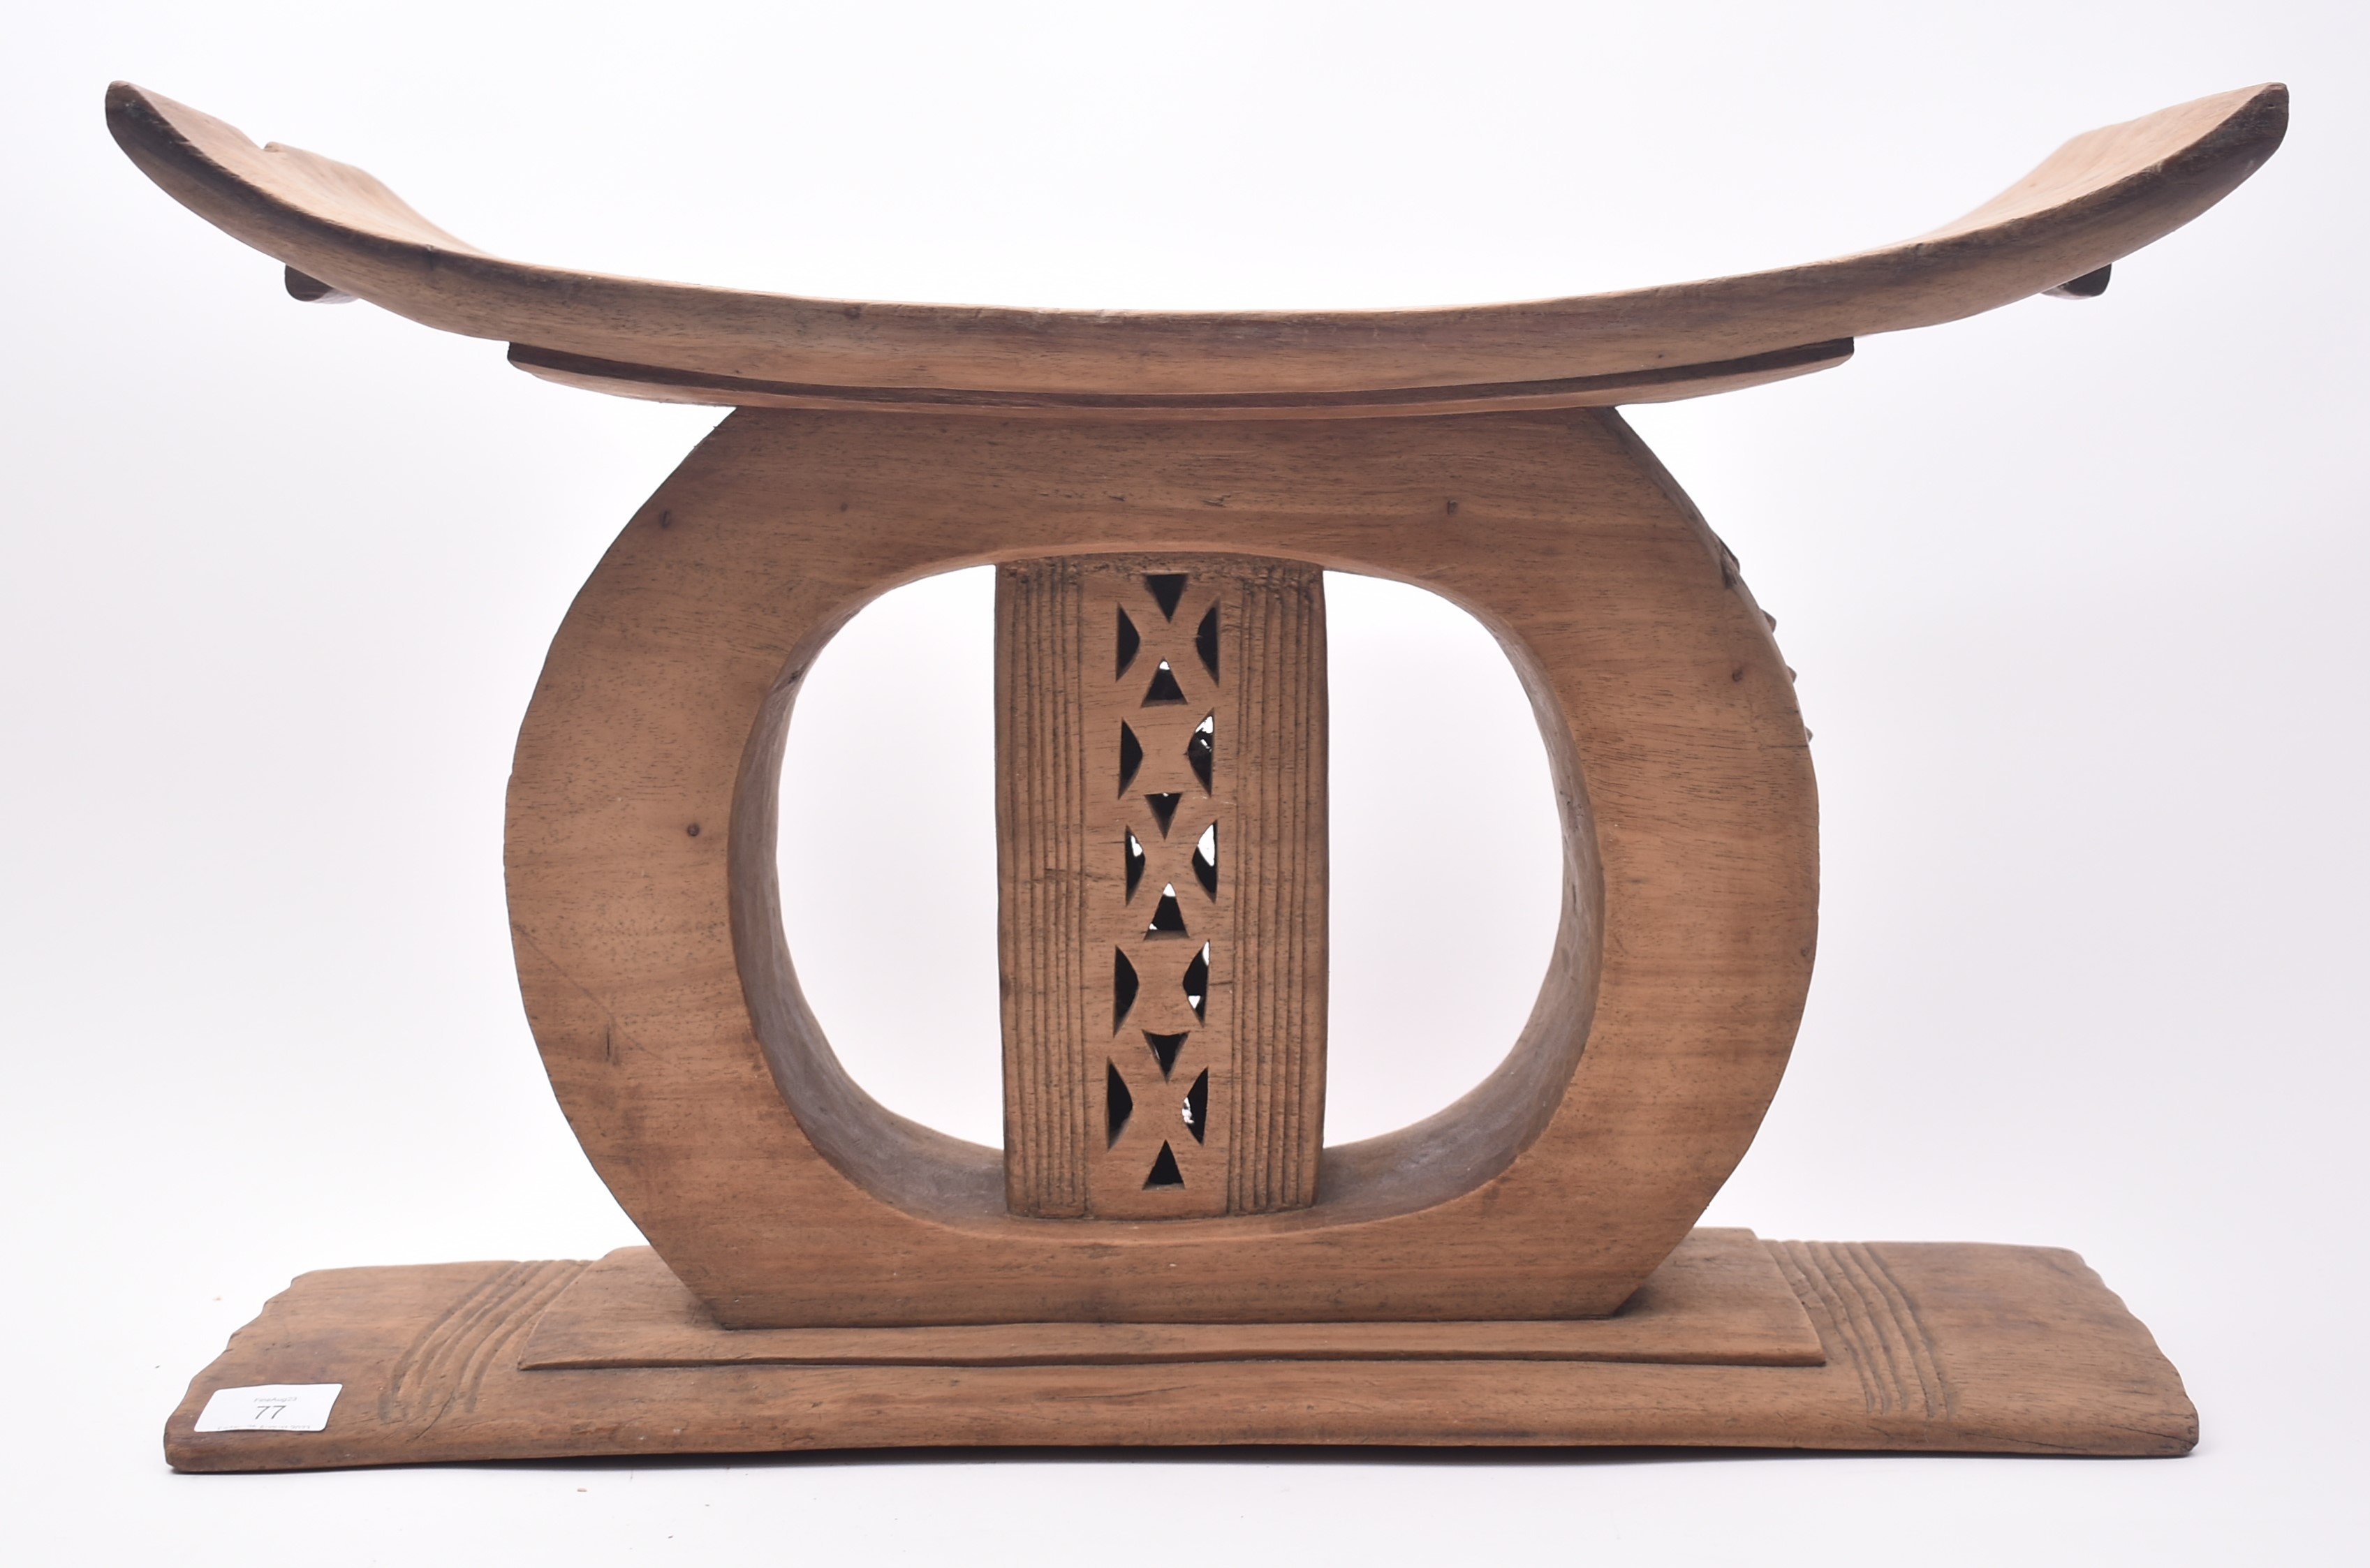 EARLY 20TH CENTURY AFRICAN ASHANTI CARVED HARDWOOD STOOL - Image 4 of 7